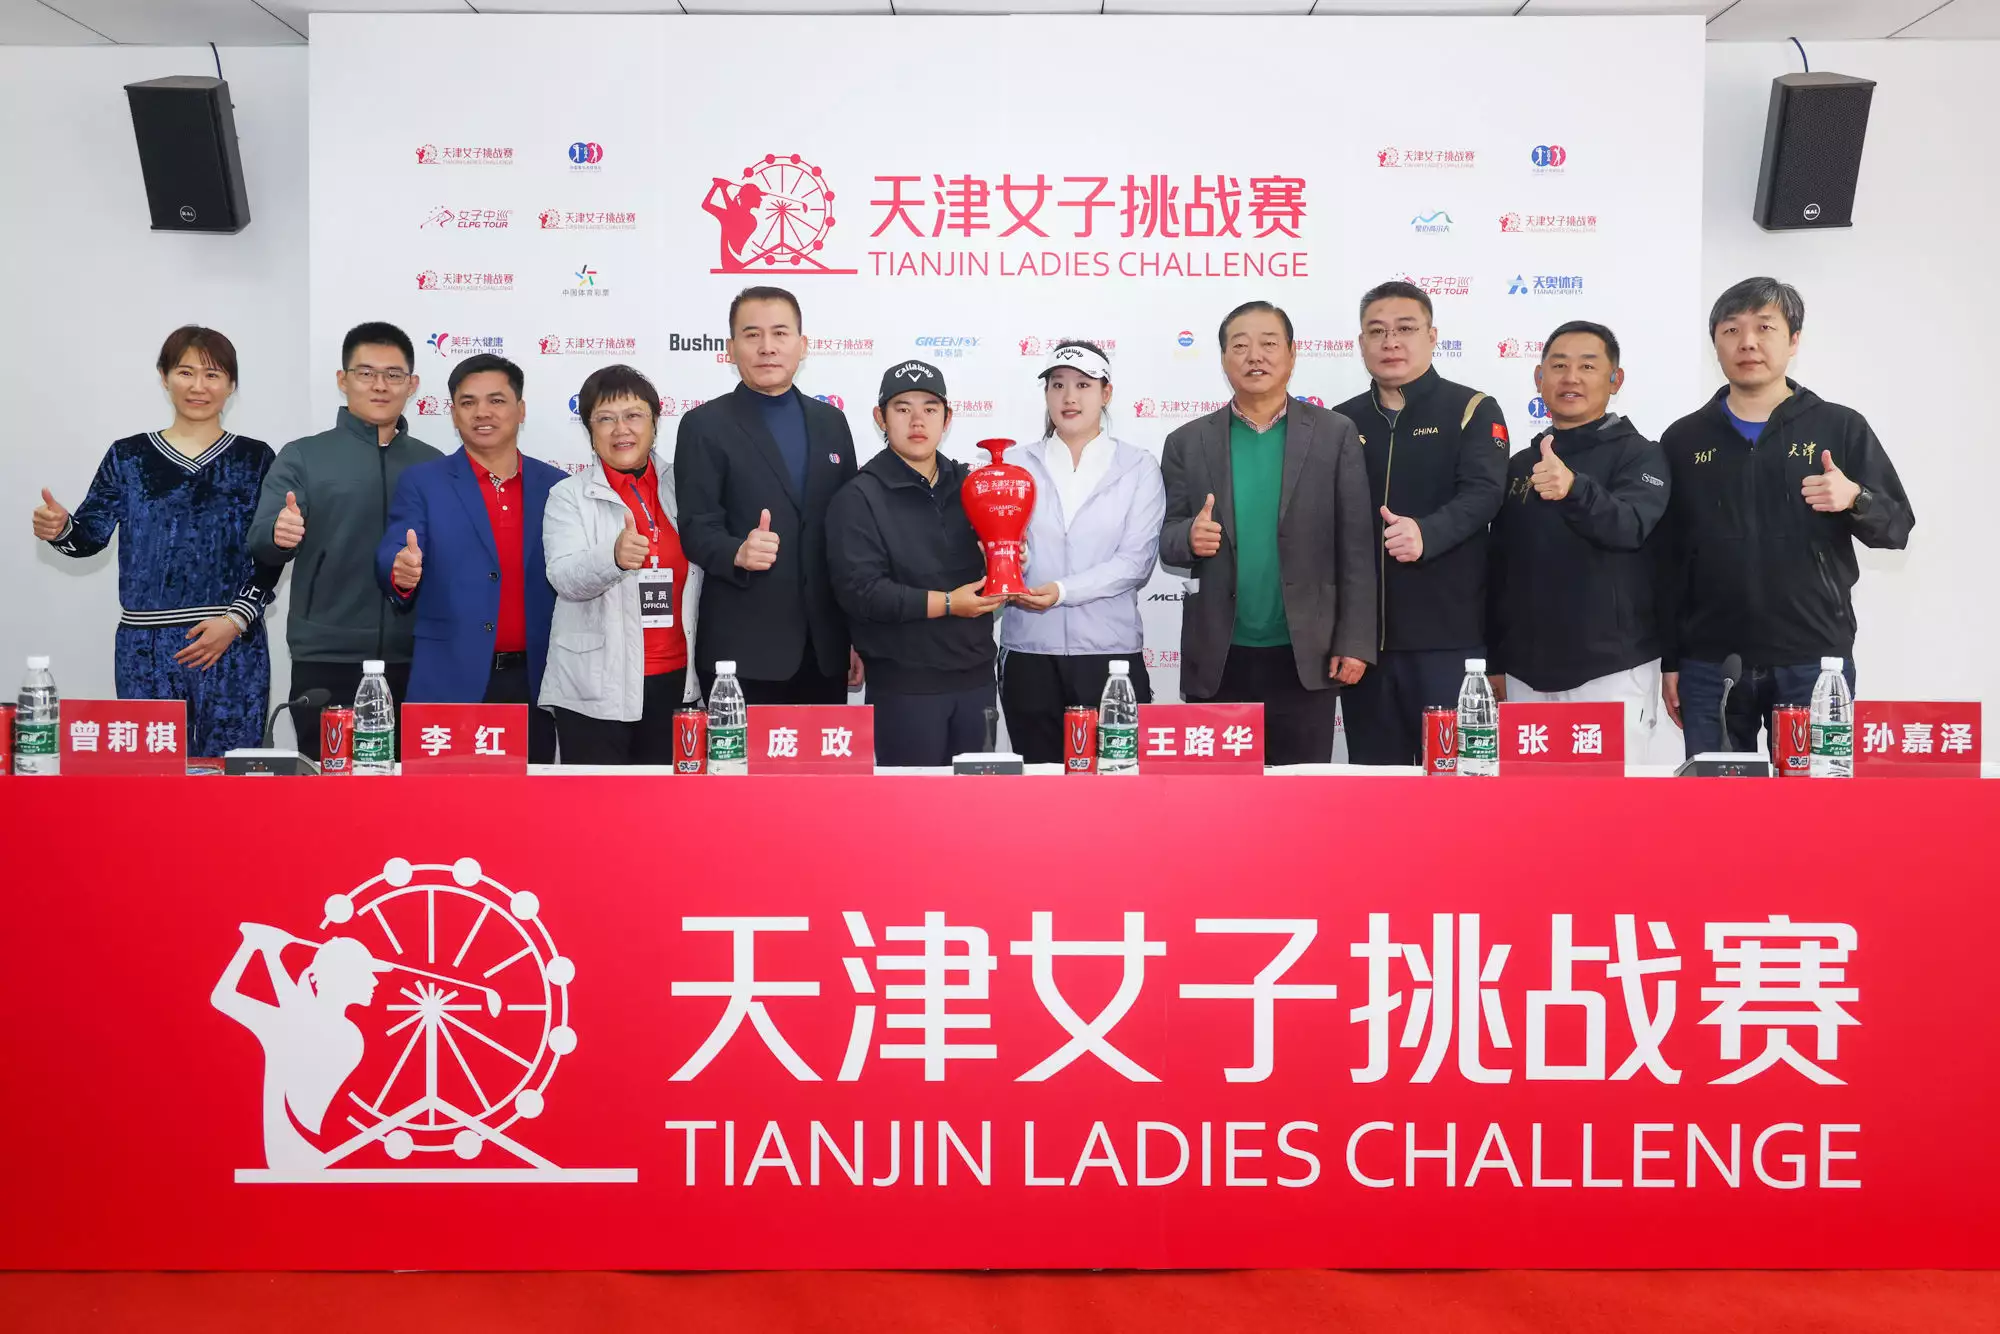 The new season of the Chinese Women's Professional Golf Tour will start a broadcast article in Tianjin